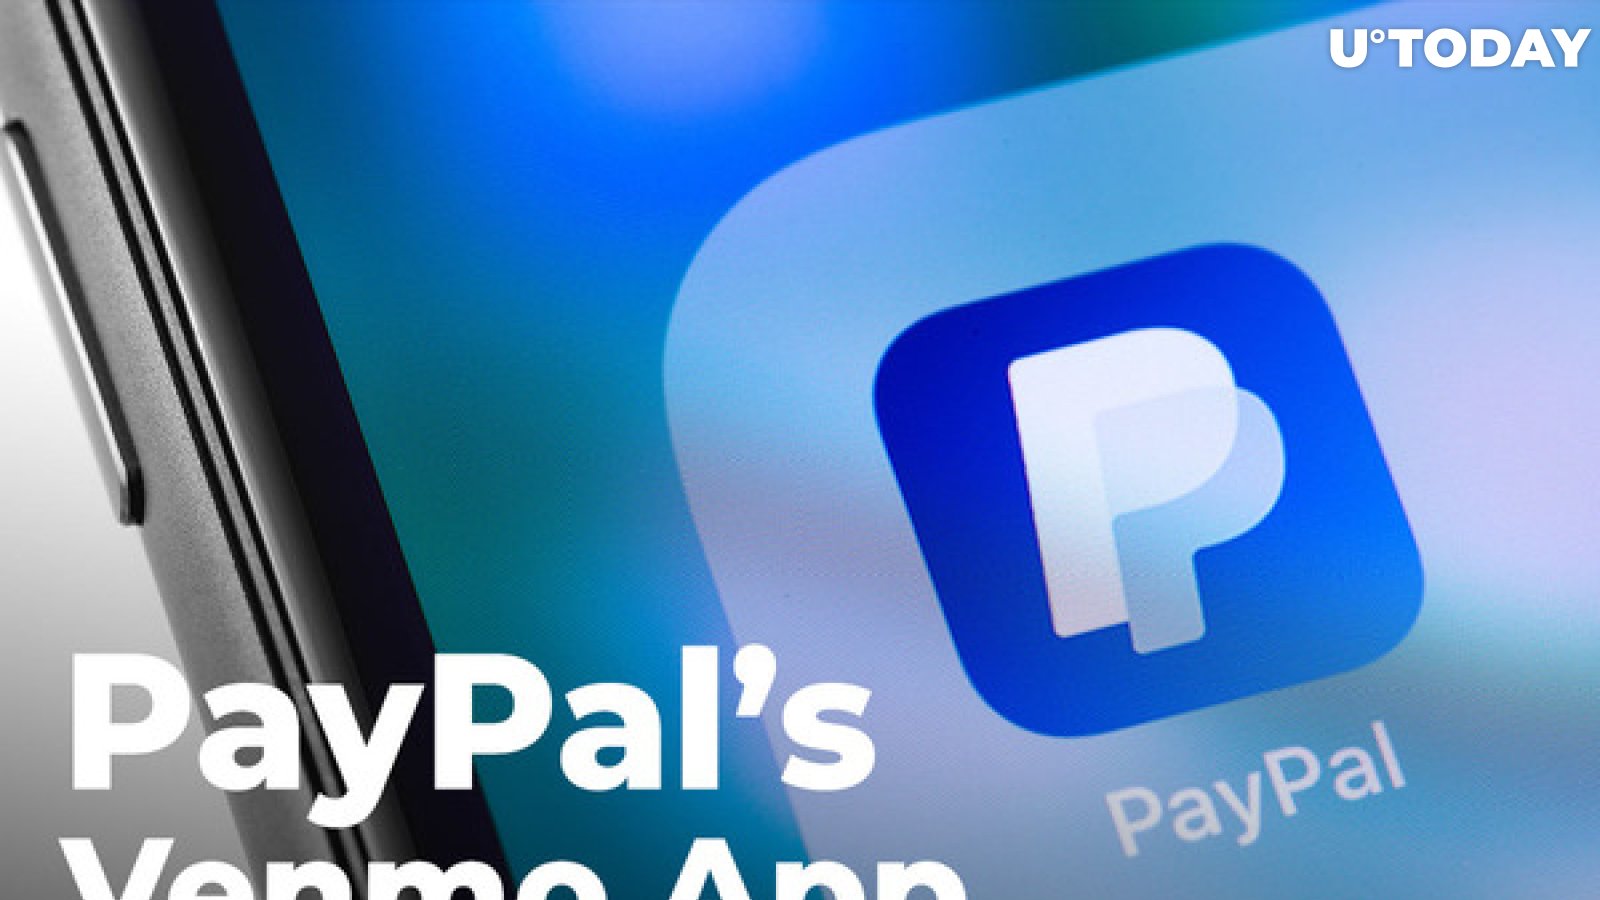 BREAKING: PayPal’s Venmo Kicks off Crypto Holding and Trading Within App 